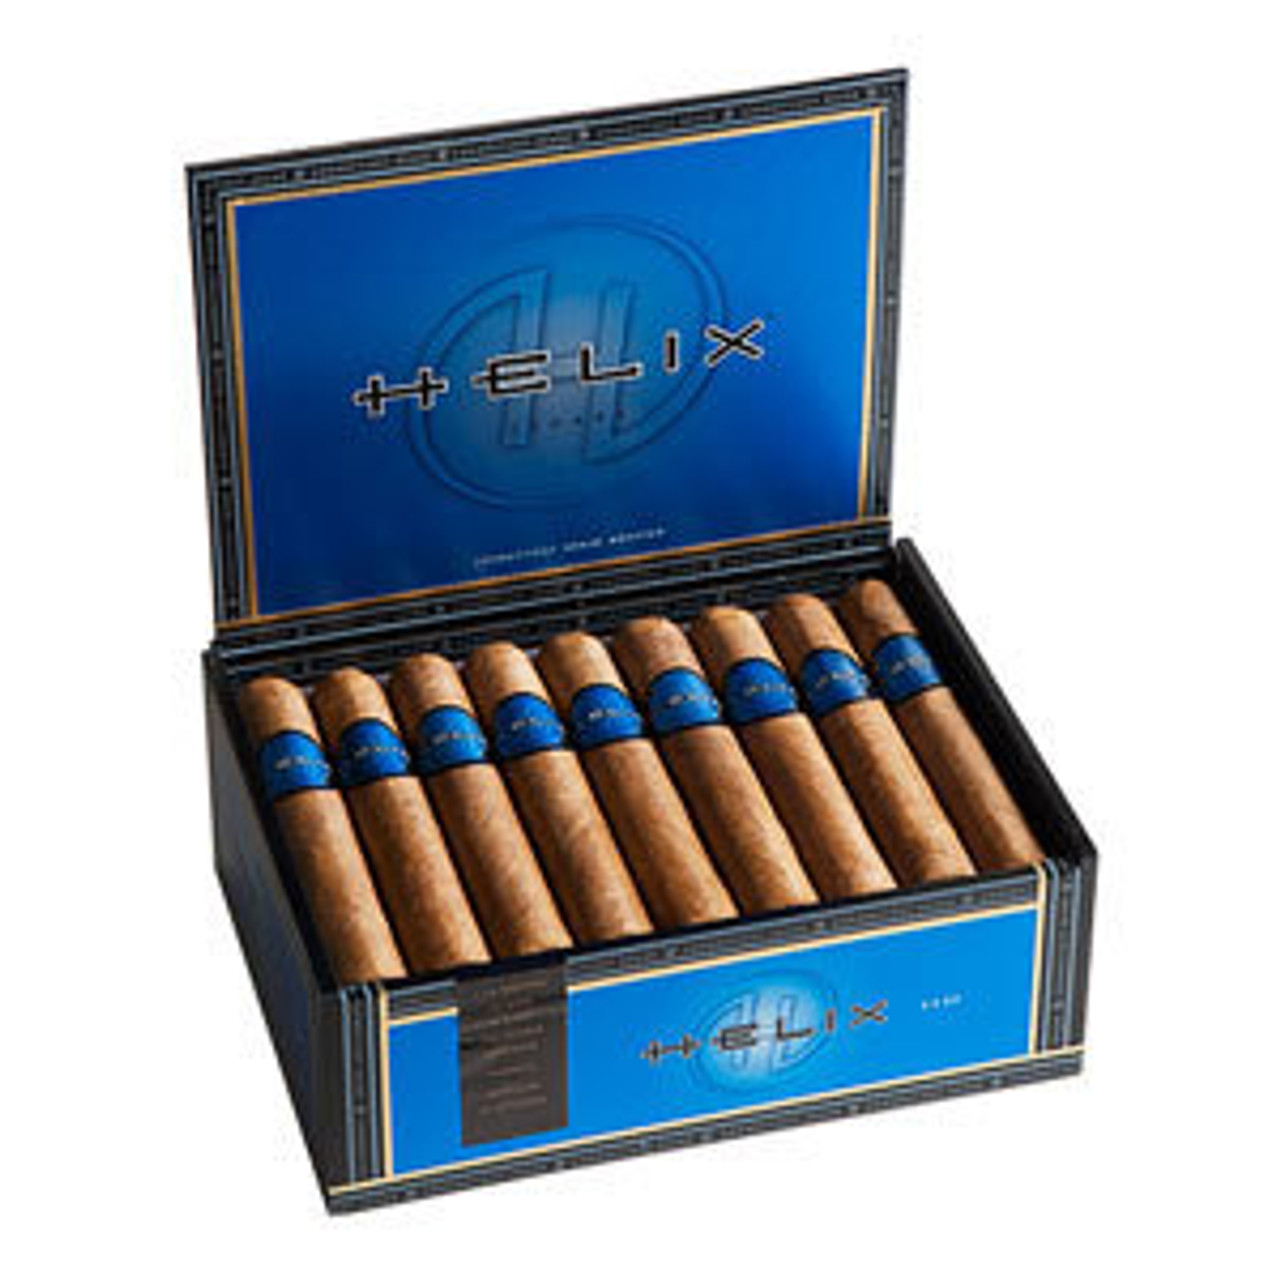 Helix X652 Cigars - 6 x 52 (Pack of 5) *Box